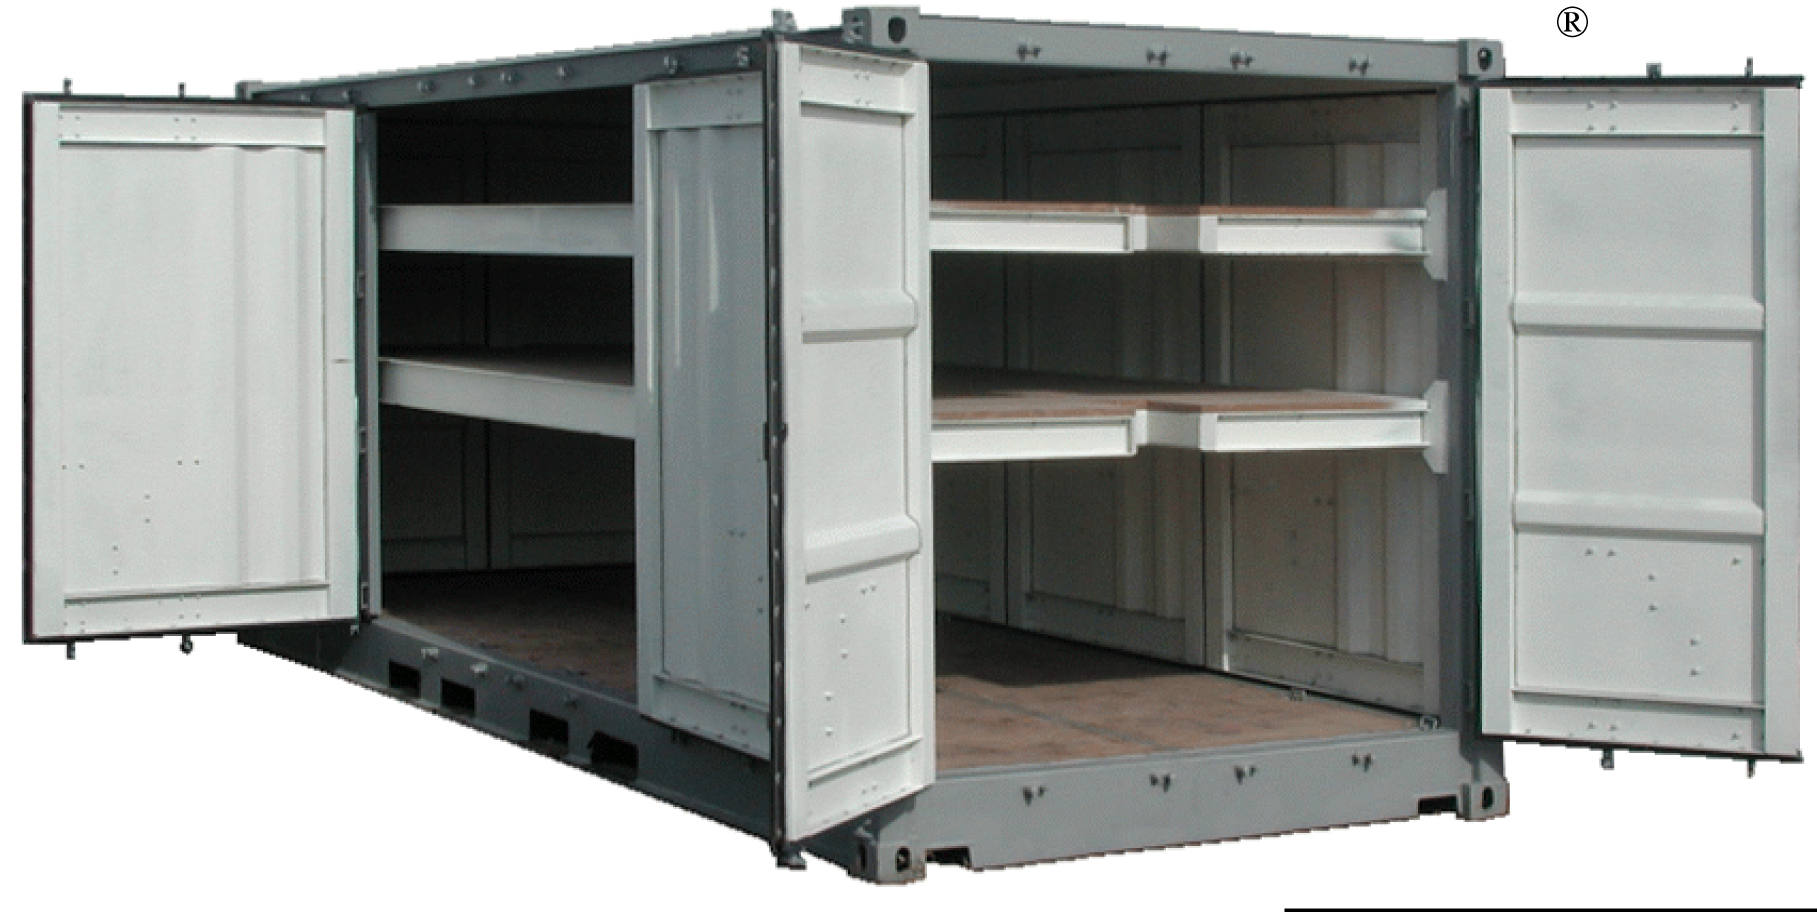 20’ x 8’6” Dry Freight ISO Container - All Access with Two Tween Decks